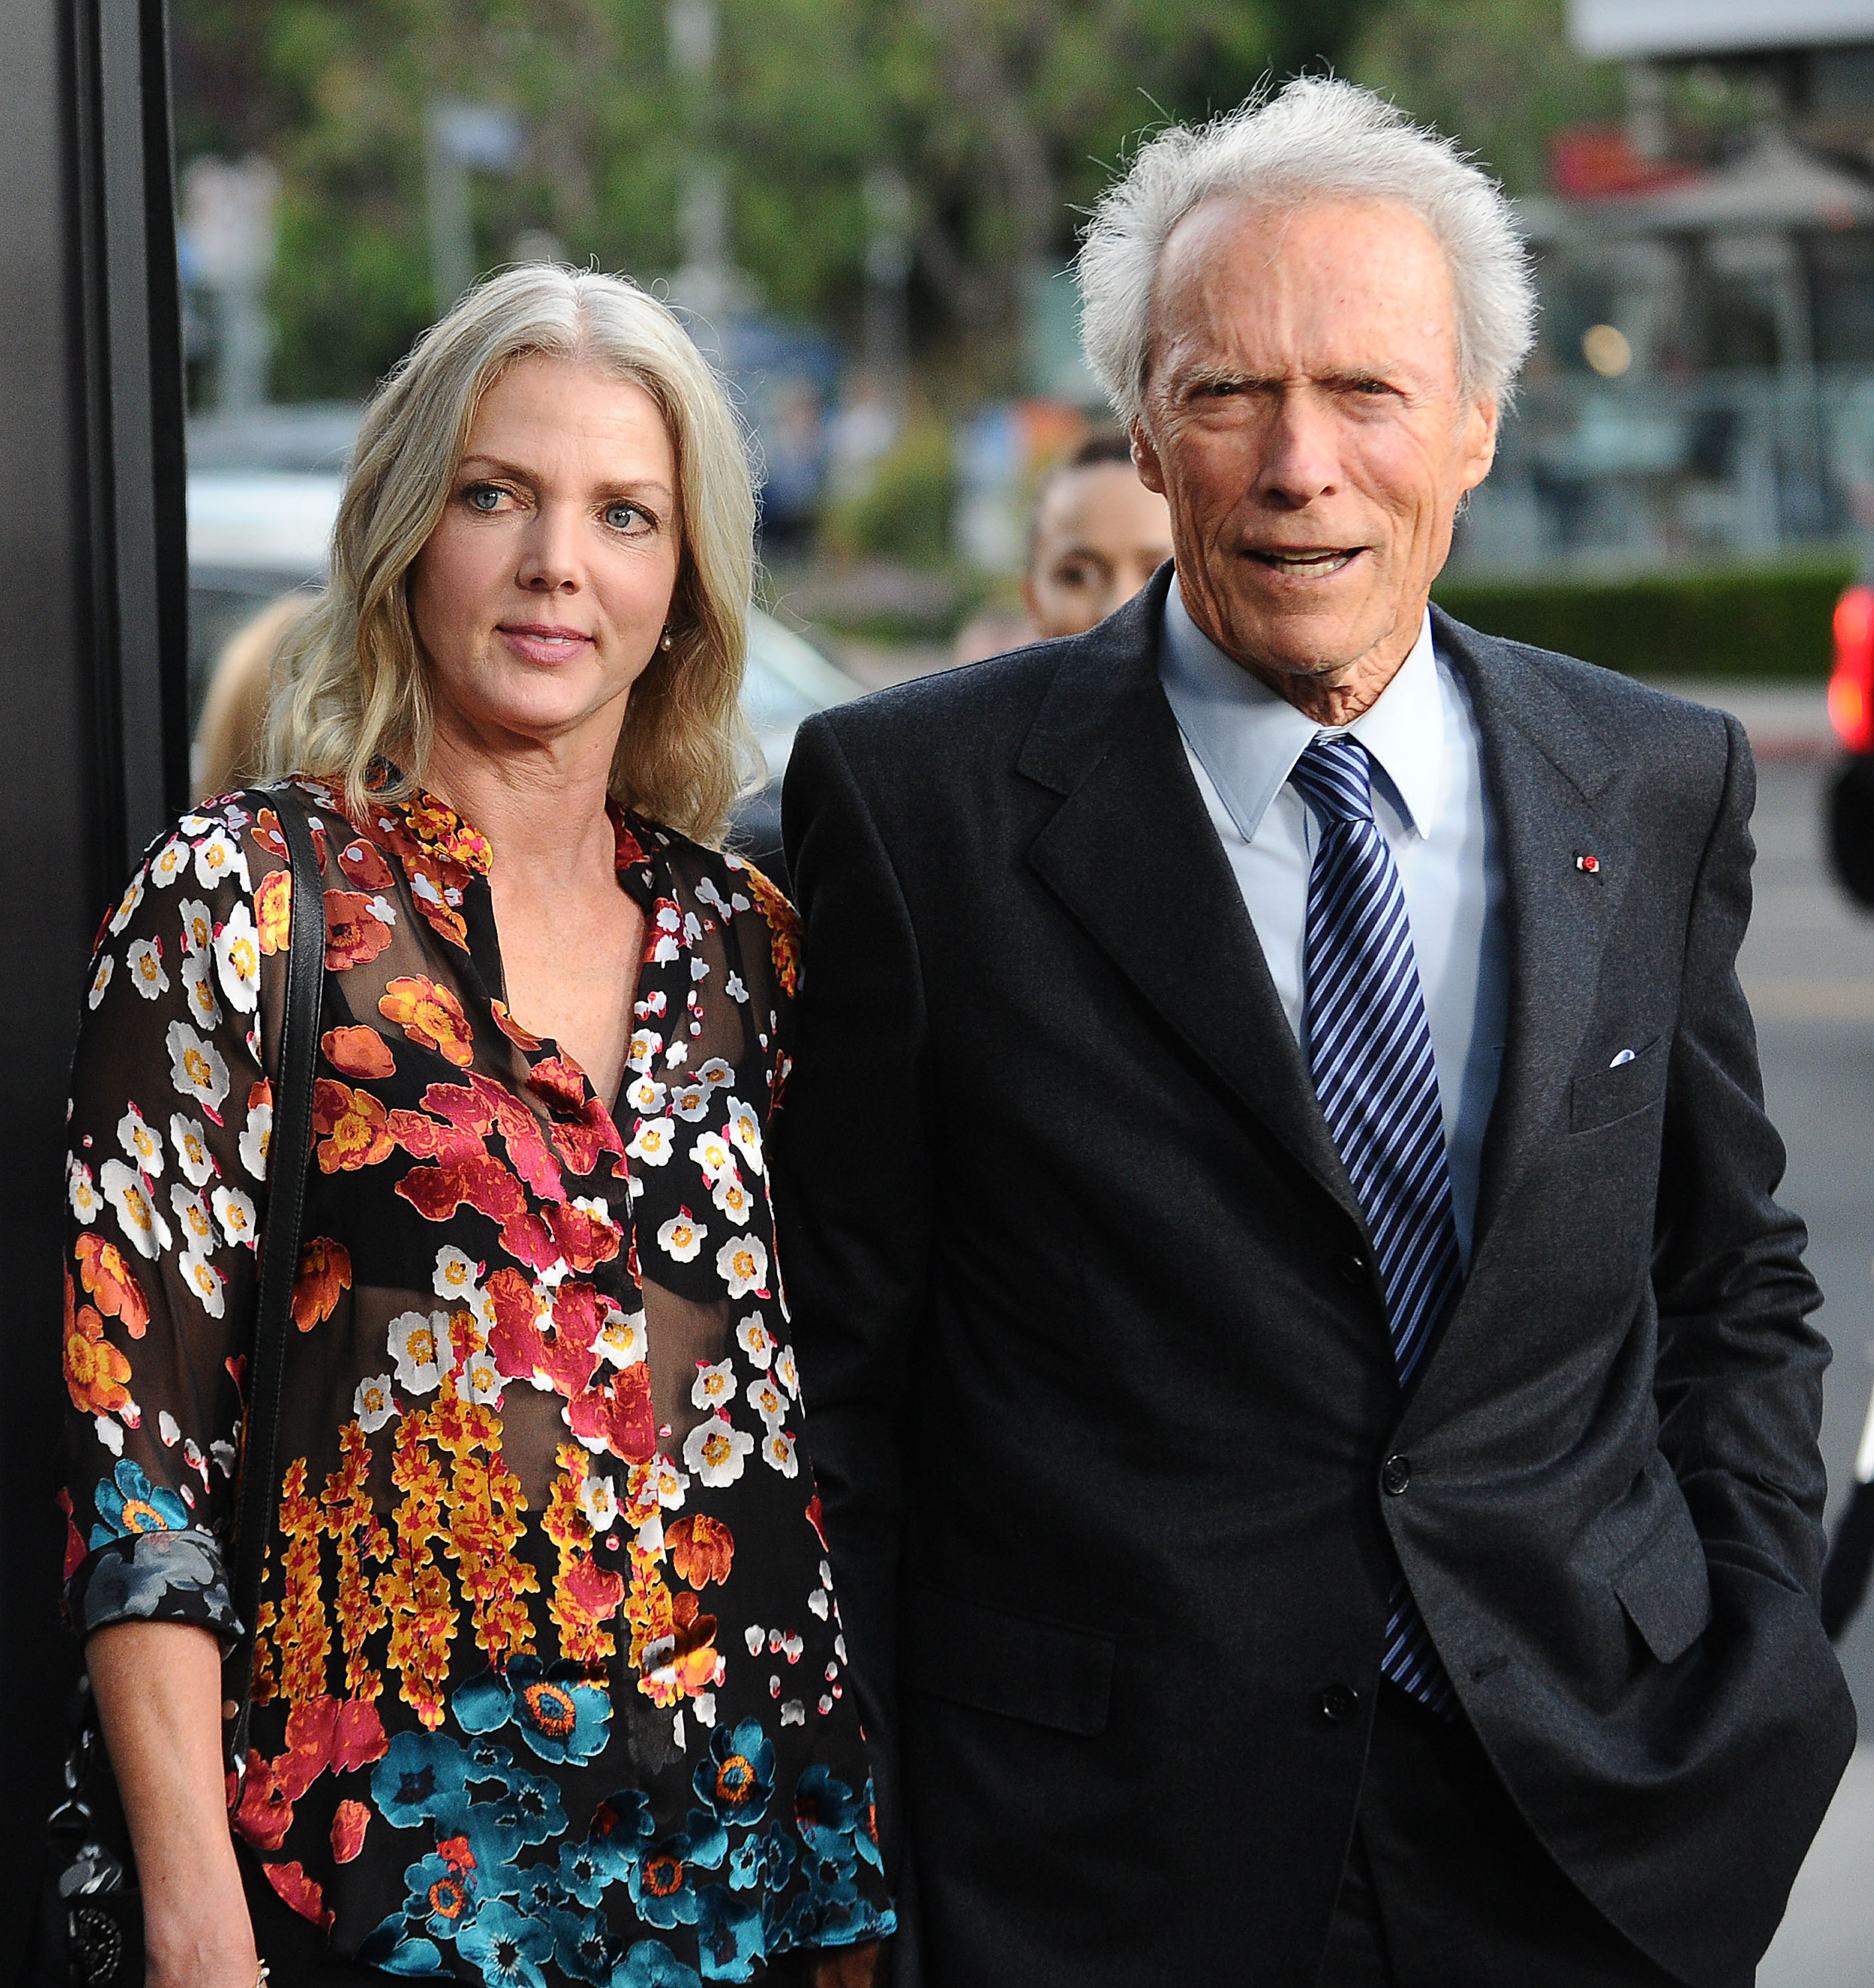 Clint Eastwood and Christina Sandera at the screening of "Sully" in Los Angeles, California on September 8, 2016 | Source: Getty Images